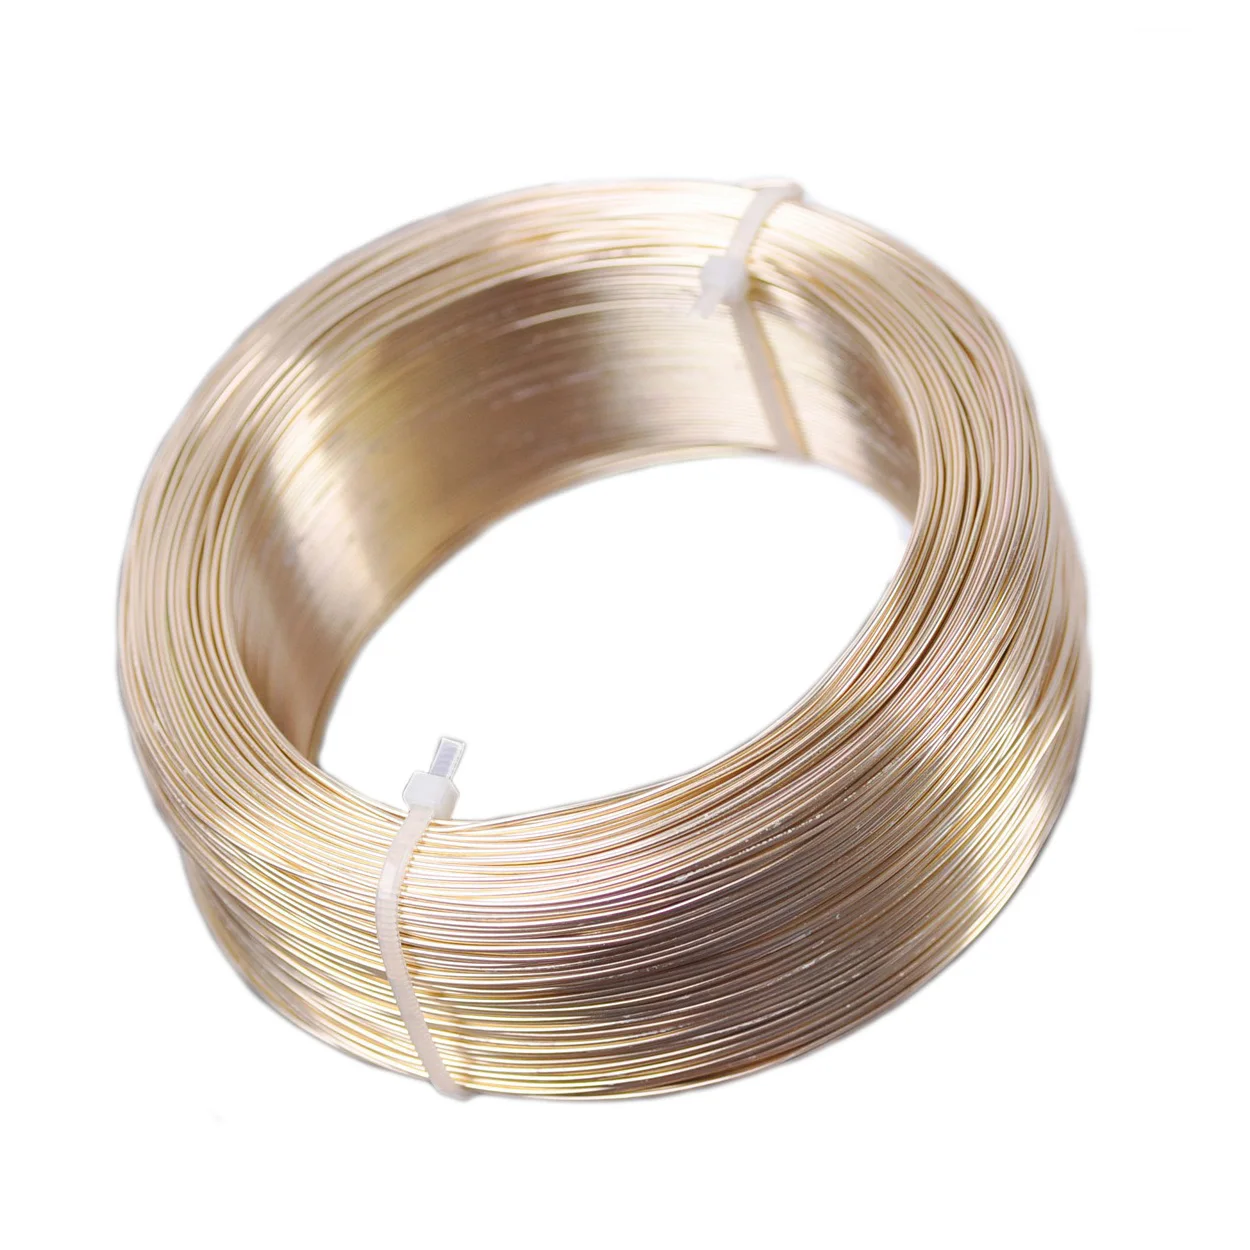 1 Large Roll 200 meters Light Gold Color 0.6mm 0.7mm Aluminium Soft Metal Beading Wire for Jewelry Making DIY Crafts